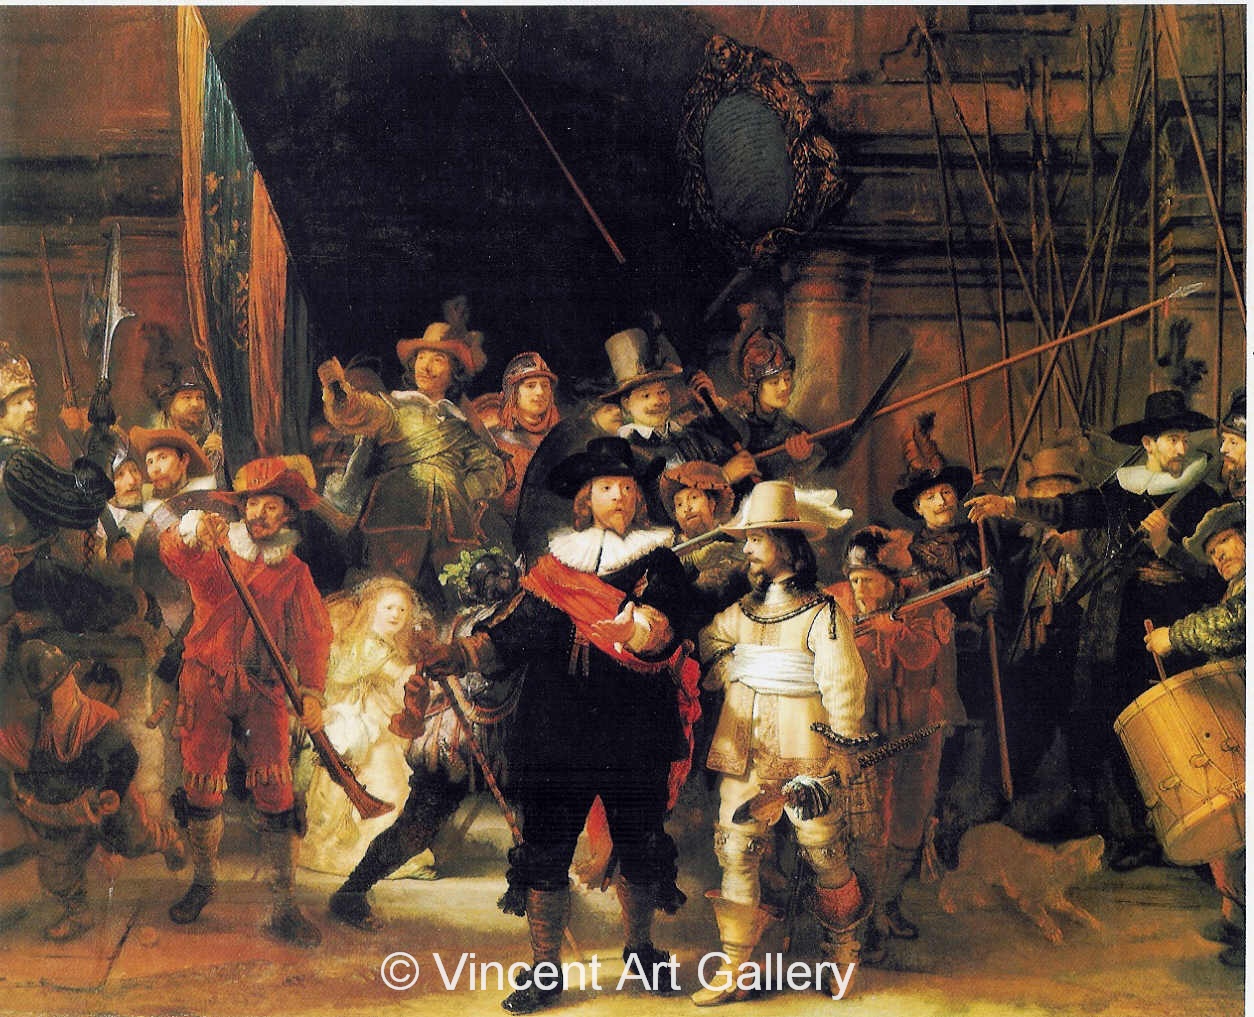 A107, REMBRANDT, The Company of Captain Frans Banning Cocq, The Nightwatch